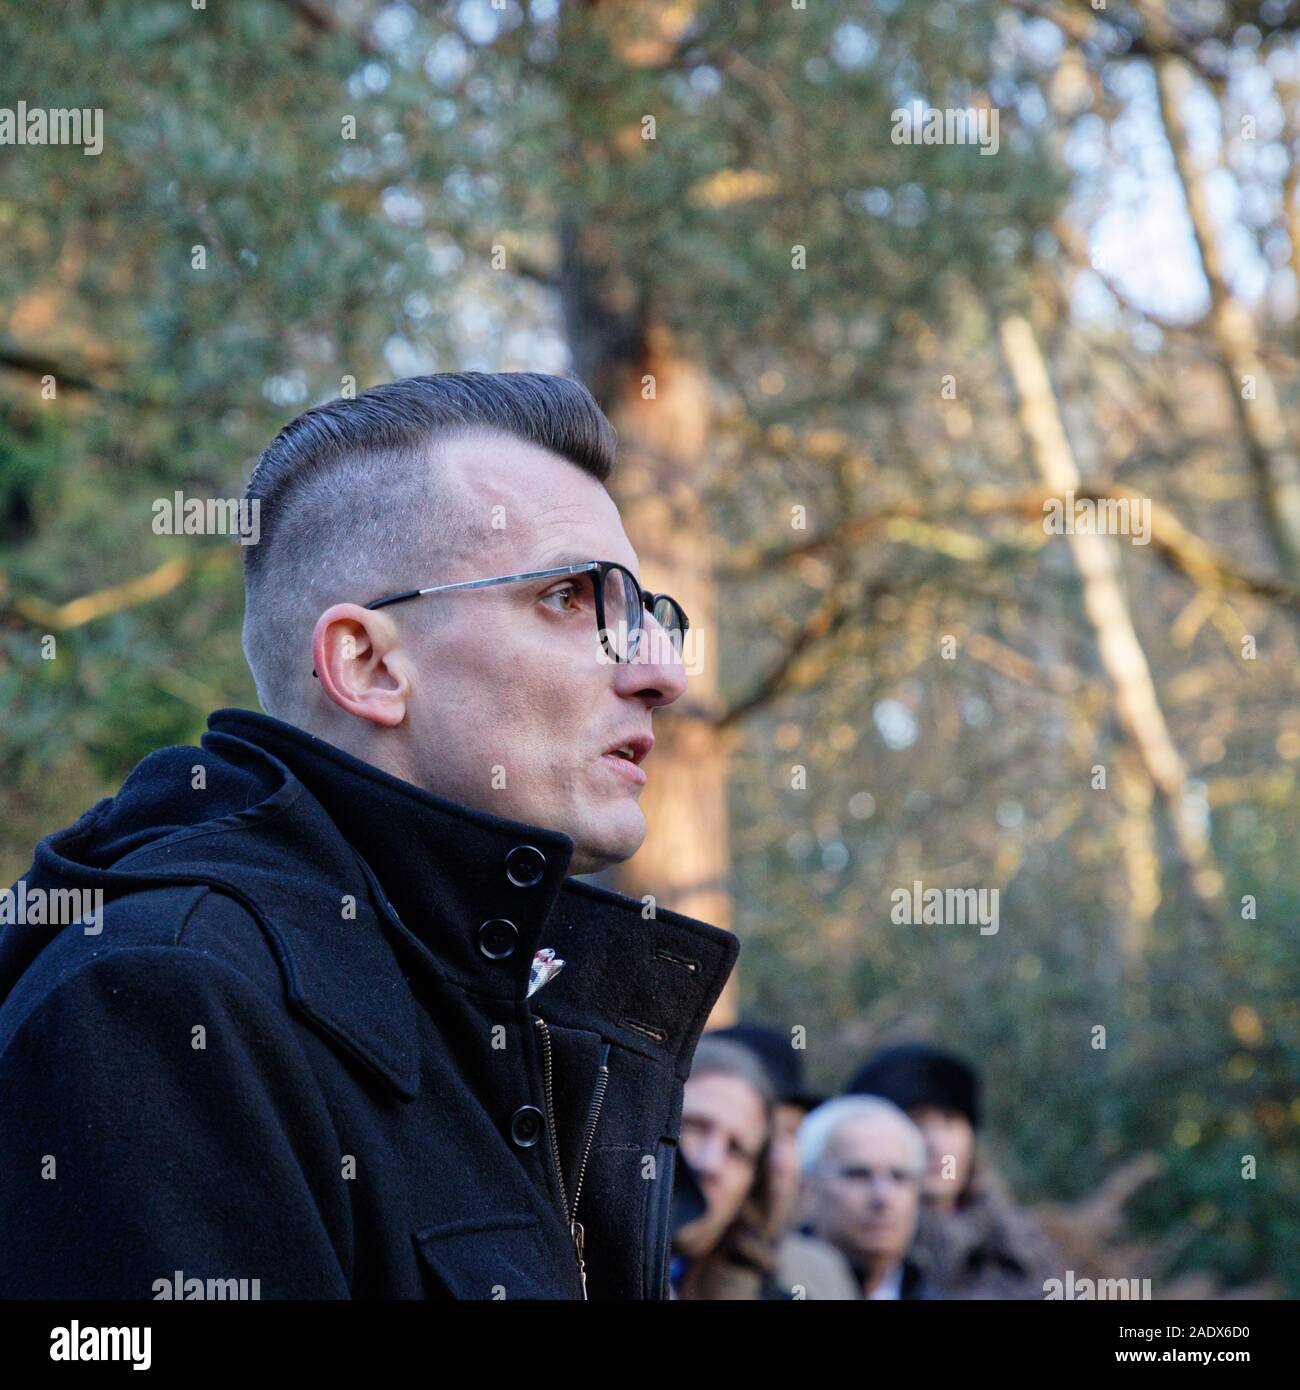 The planting of the 13th International Tree of Peace in the UK - a project begun in Slovakia & led by Marek SobolaWed 4th Dec 2019, Brookwood Civilian Cemetery, Surrey, UK. Marek Sobola addresses the gathering before the ceremonial tree planting. Stock Photo